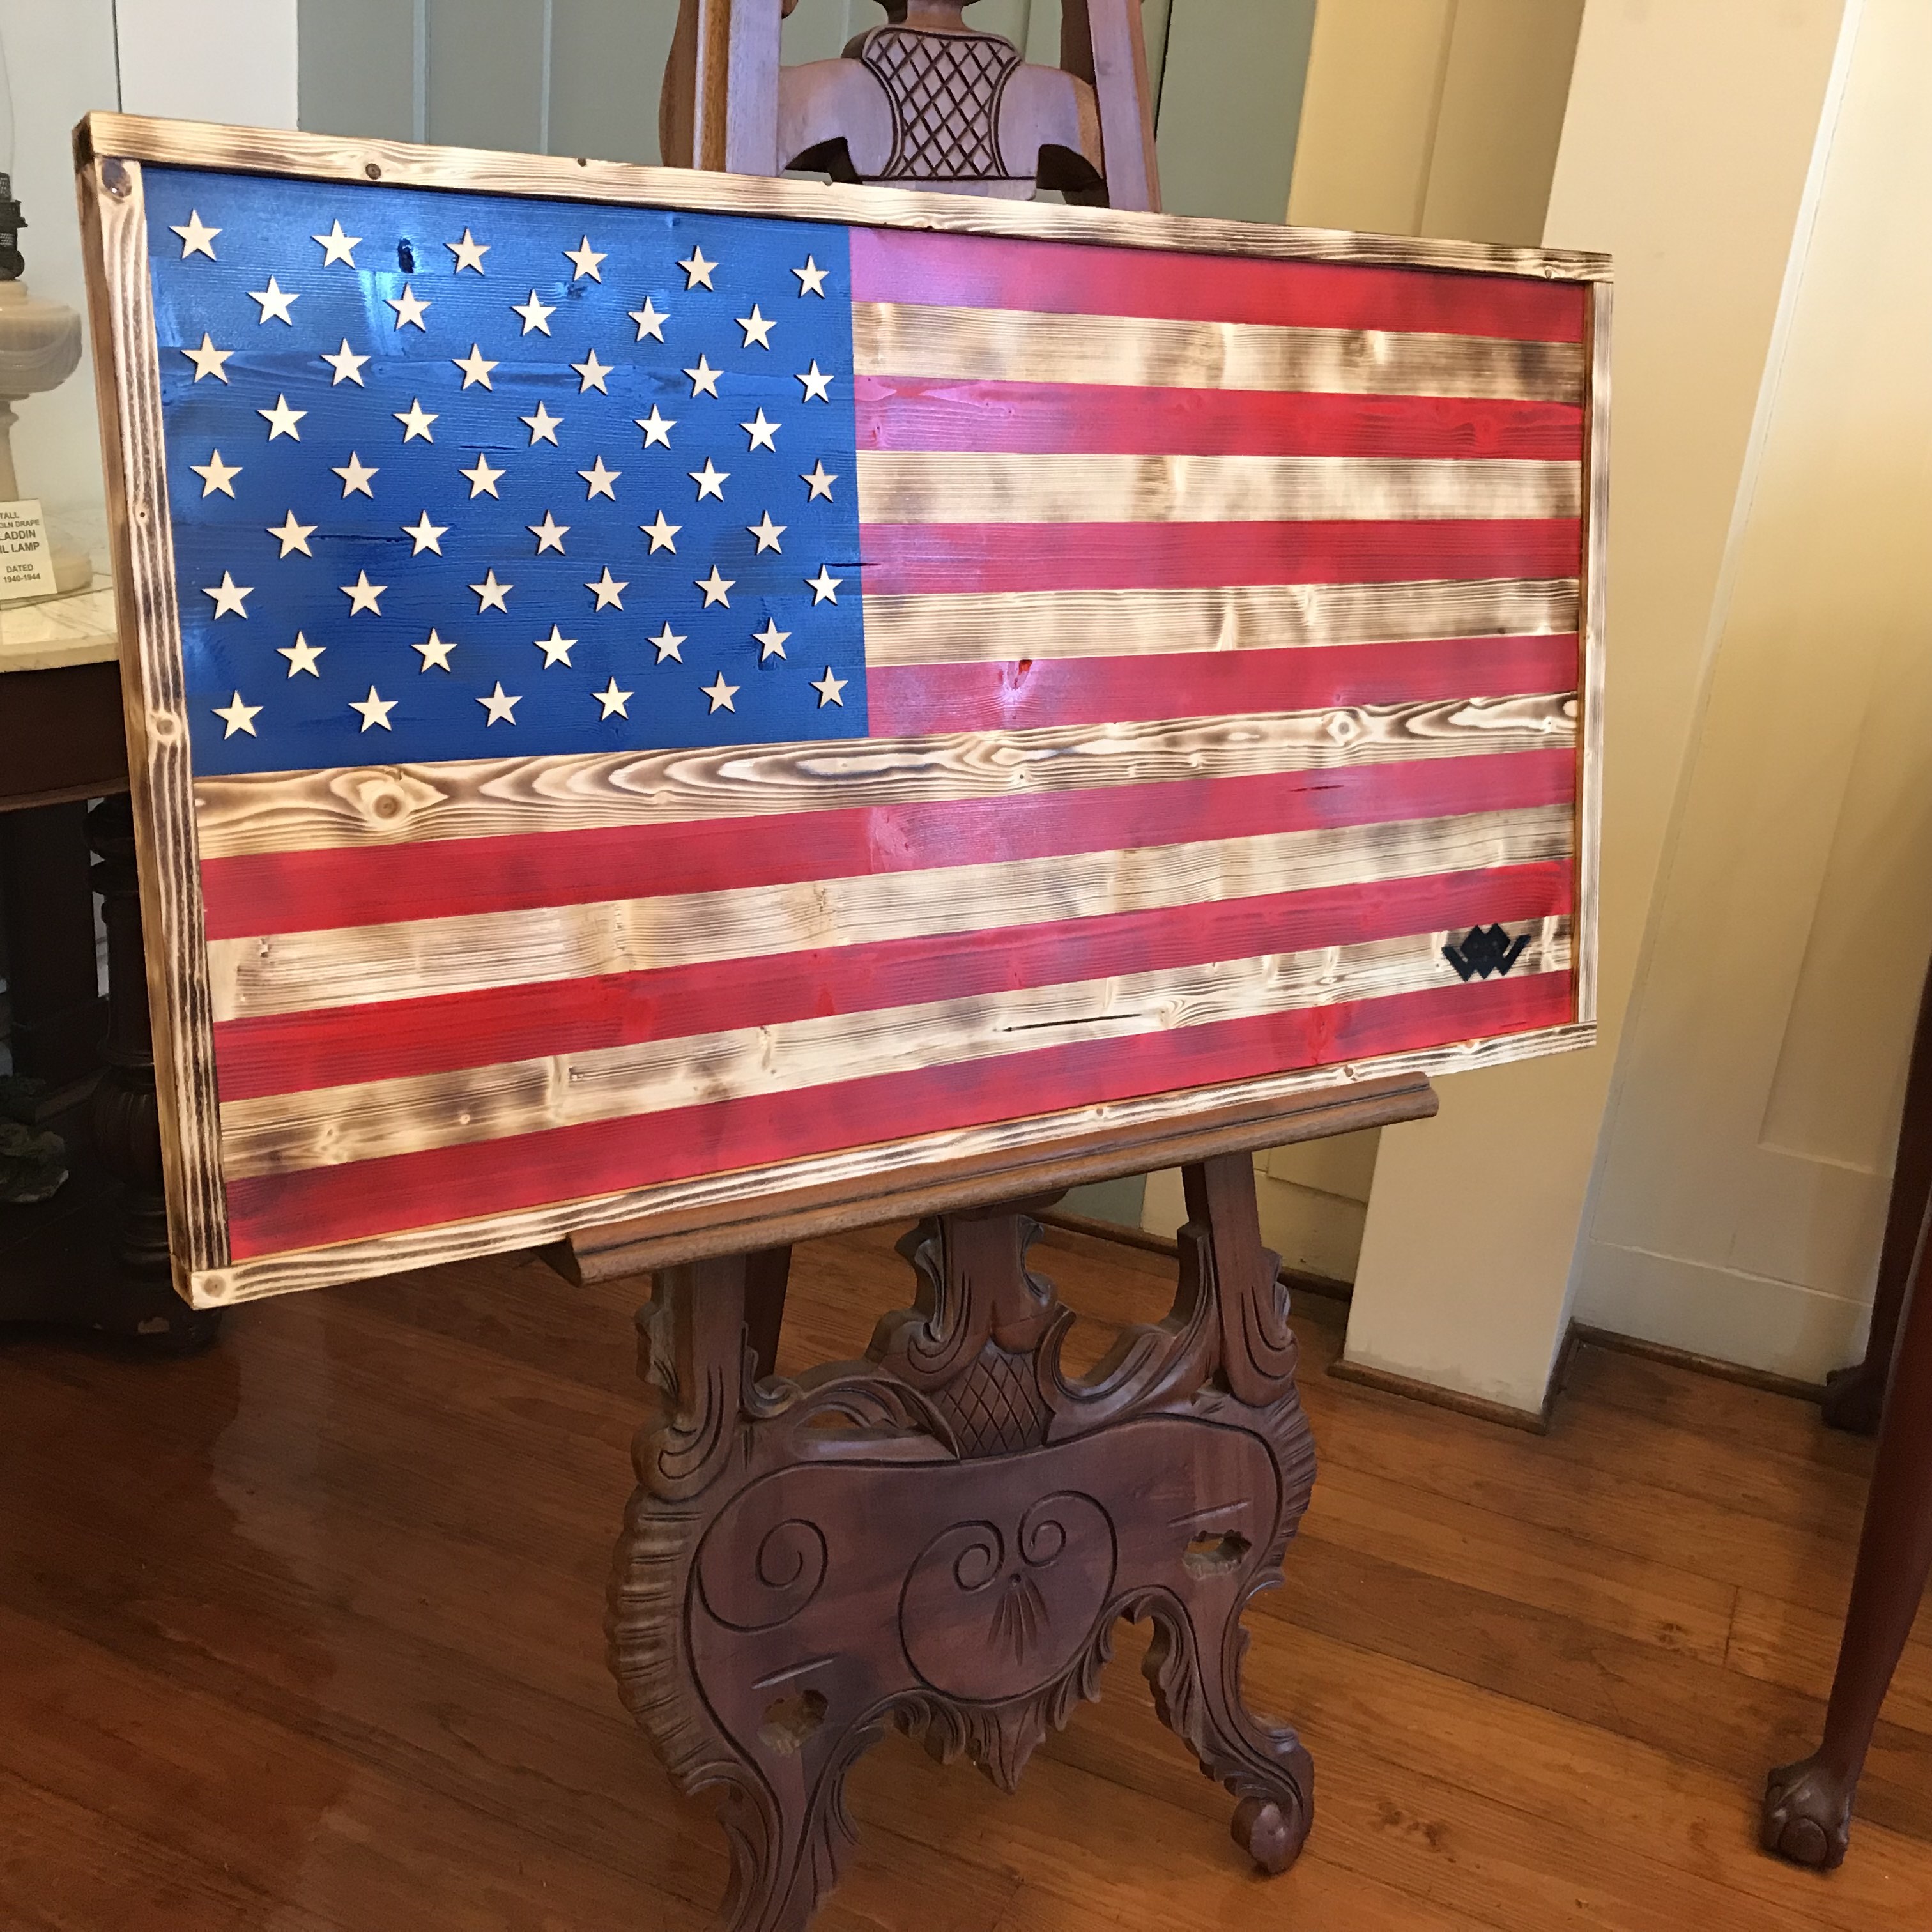 Warriors Heart Foundation Fundraiser - Traditional Flag for Silent Auction